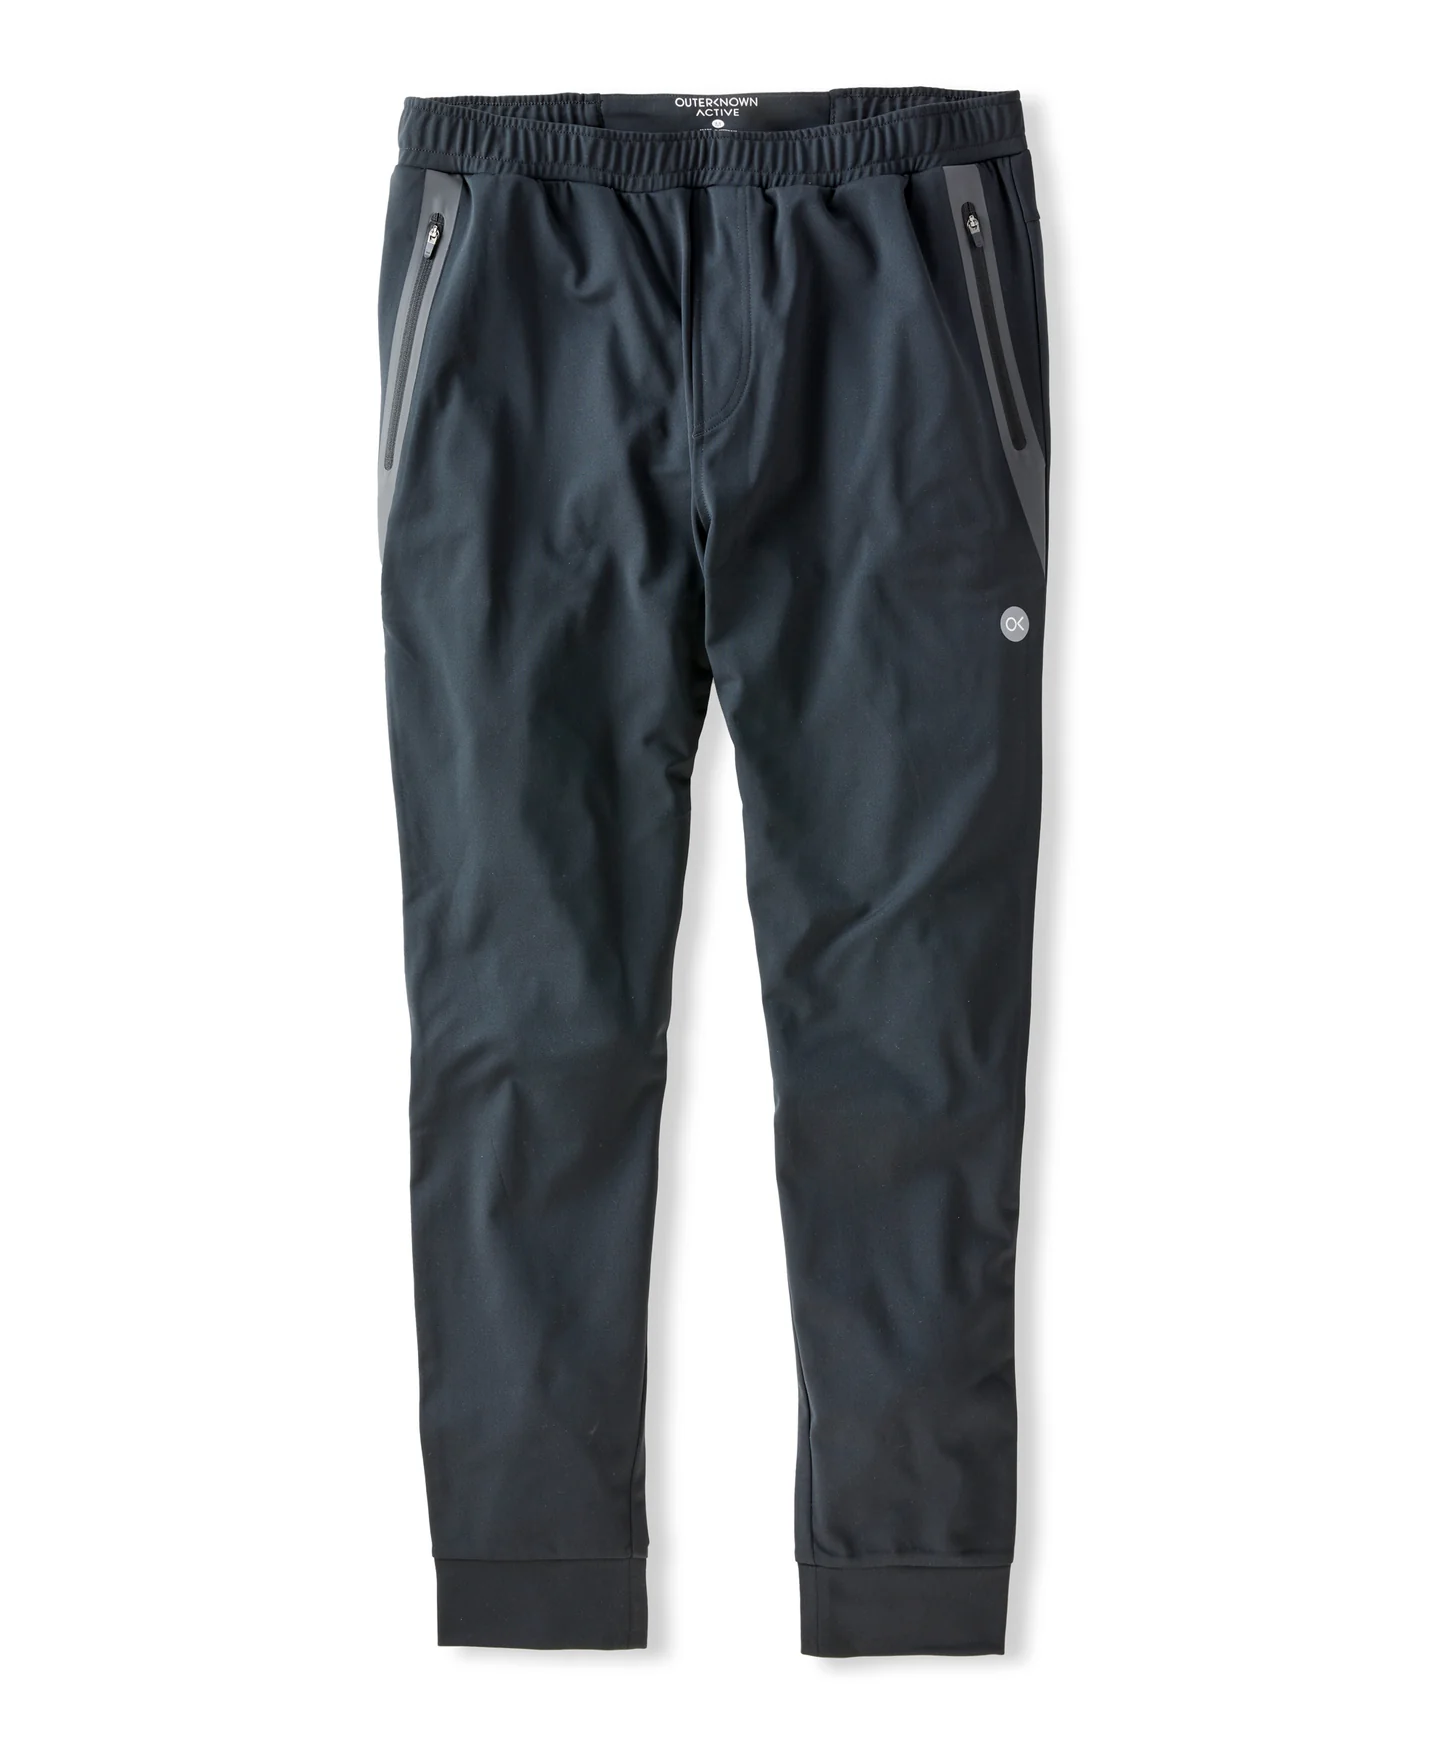 A Better Alternative to Vuori's Sunday Performance Joggers - Softer,  Cheaper, and Sustainable